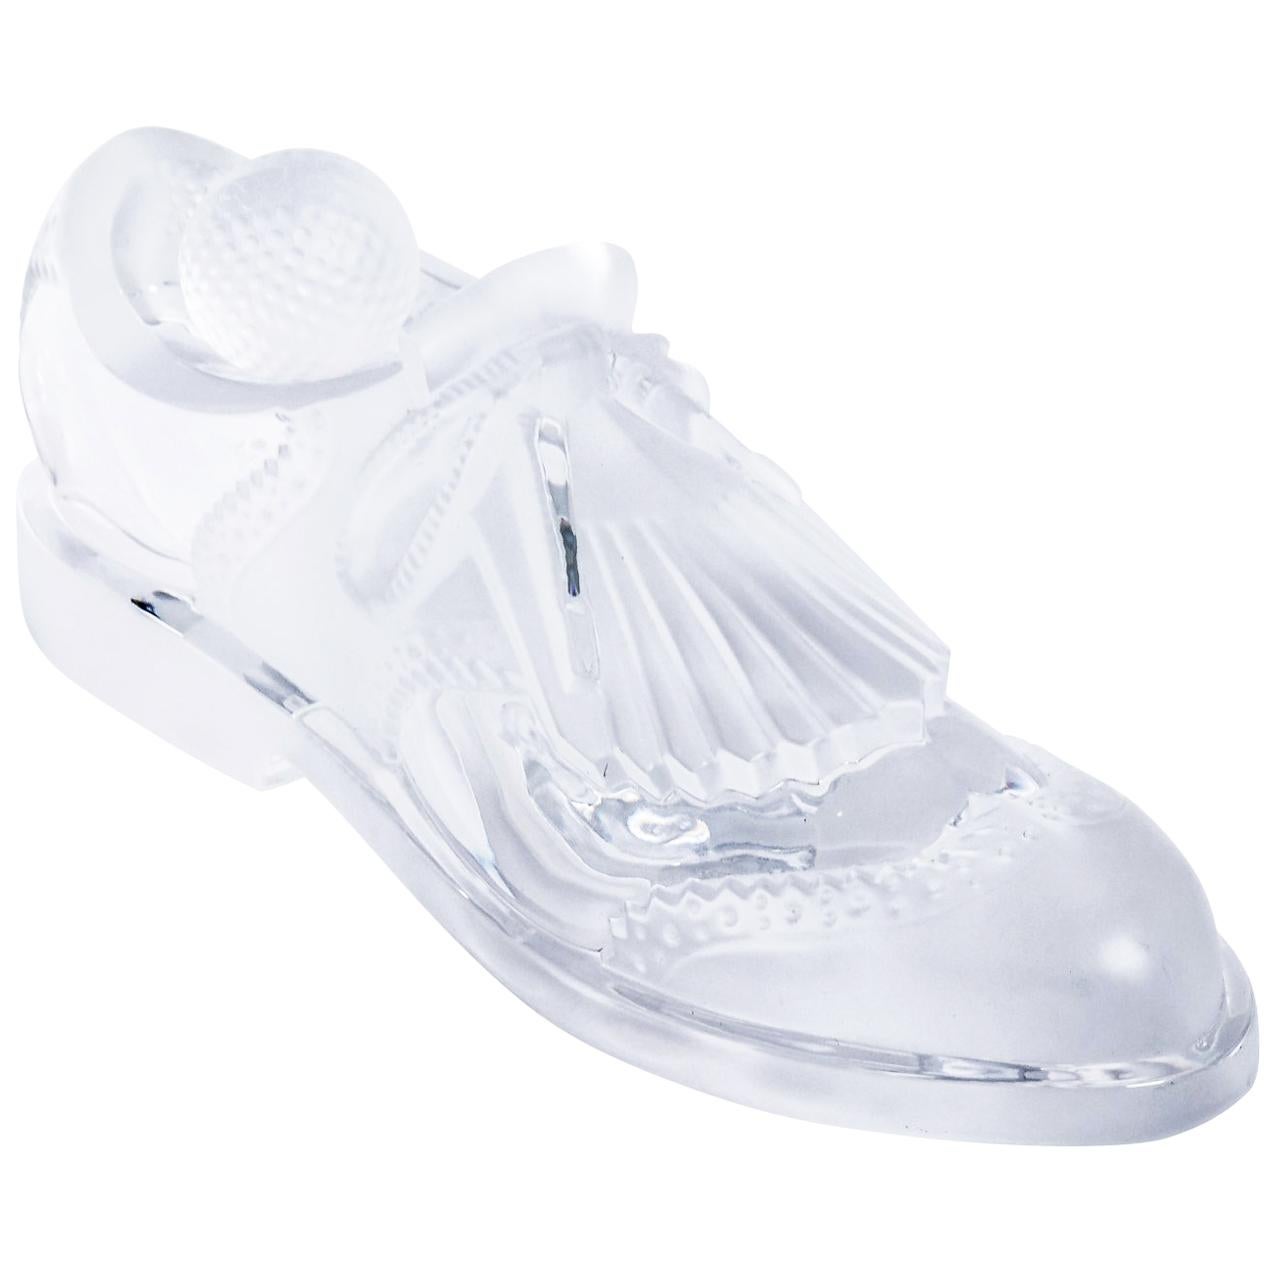 Crystal Golf Shoe and Bell by Royales De Champagne